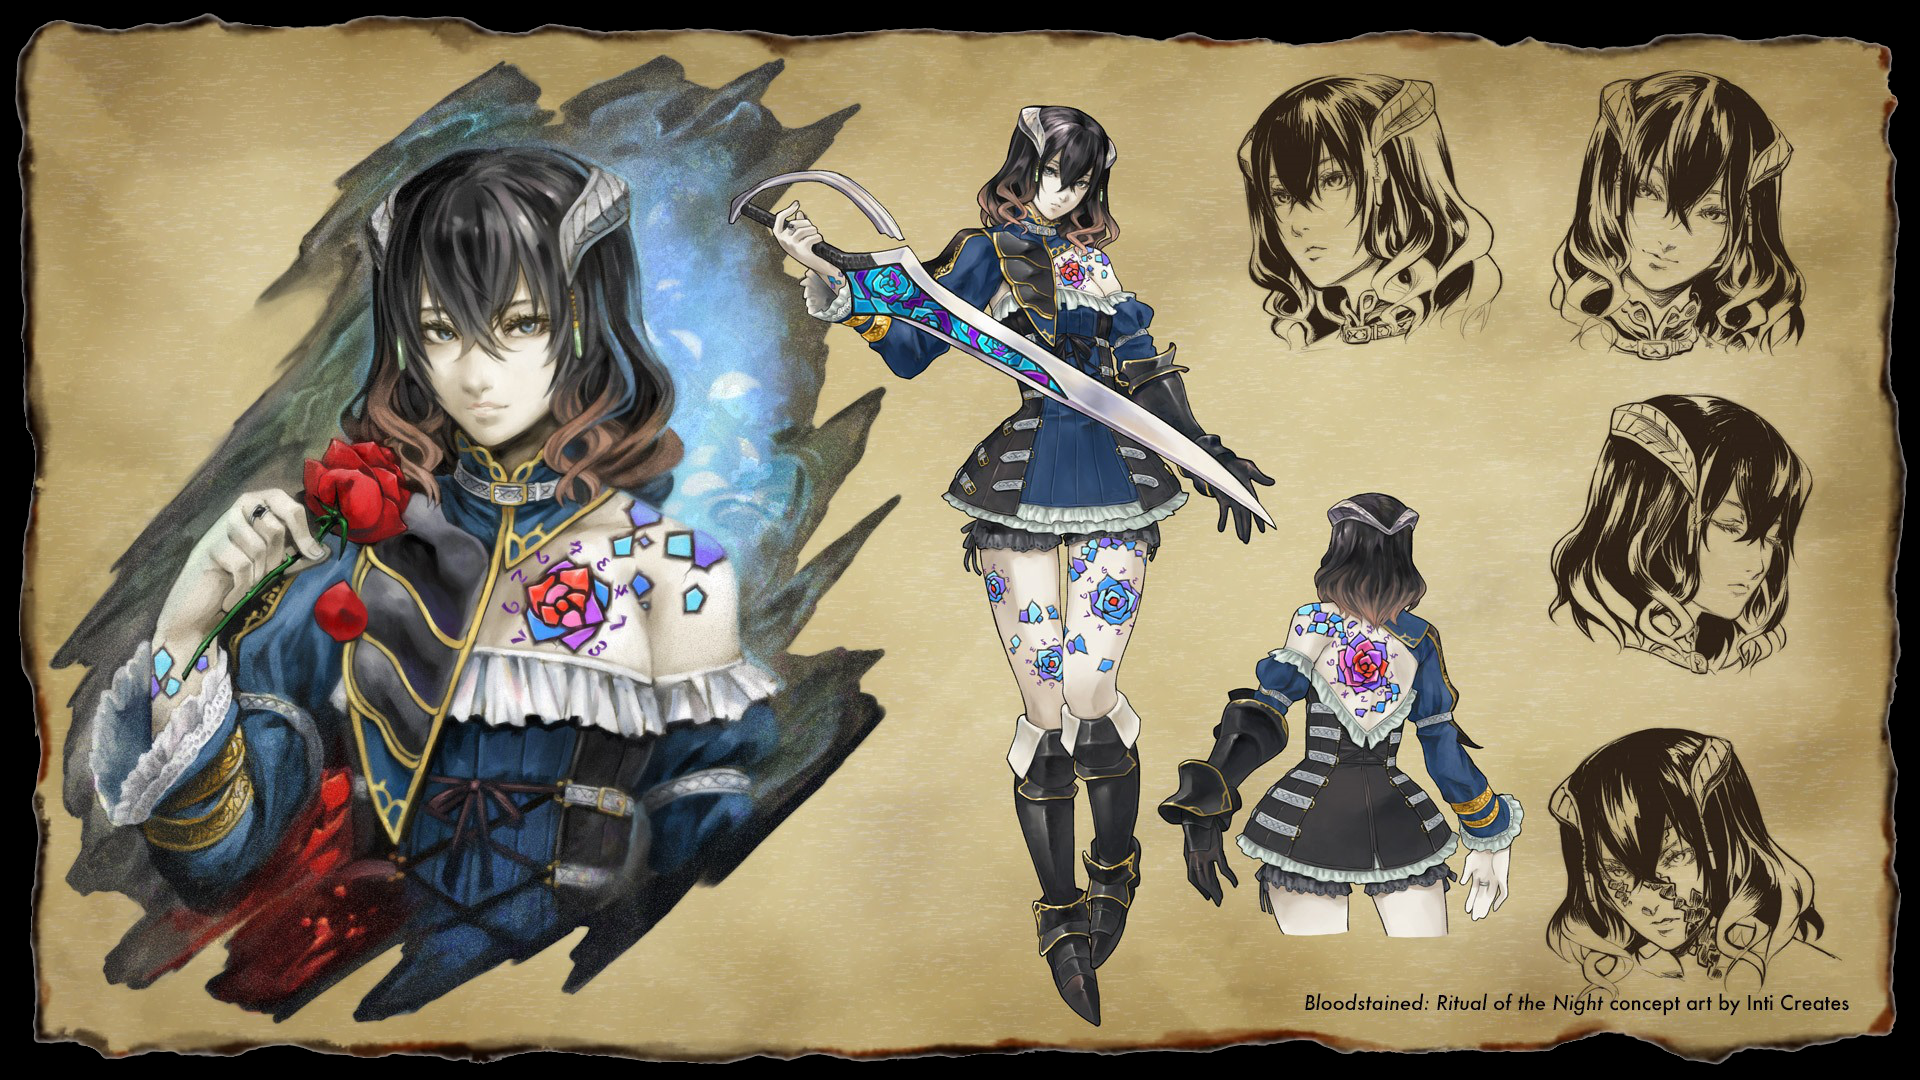 General 1920x1080 video games Bloodstained: Ritual of the Night fantasy art parchment Miriam (Bloodstained) stained glass video game girls rose women with swords fantasy girl